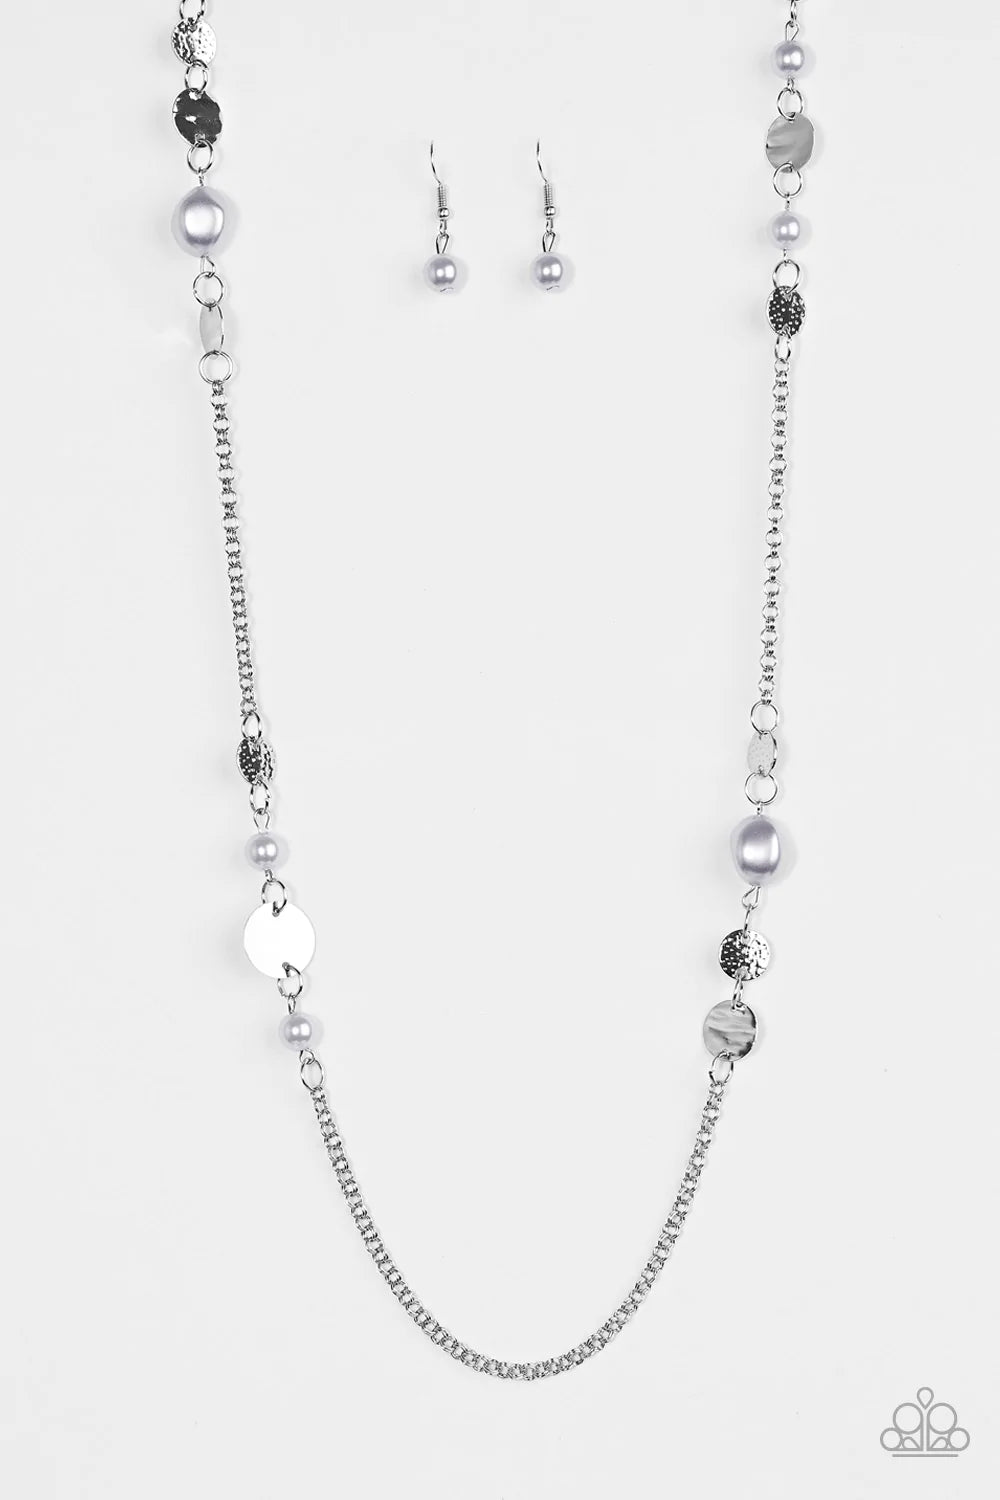 Paparazzi Necklace ~ GLAM-tastic! - Silver